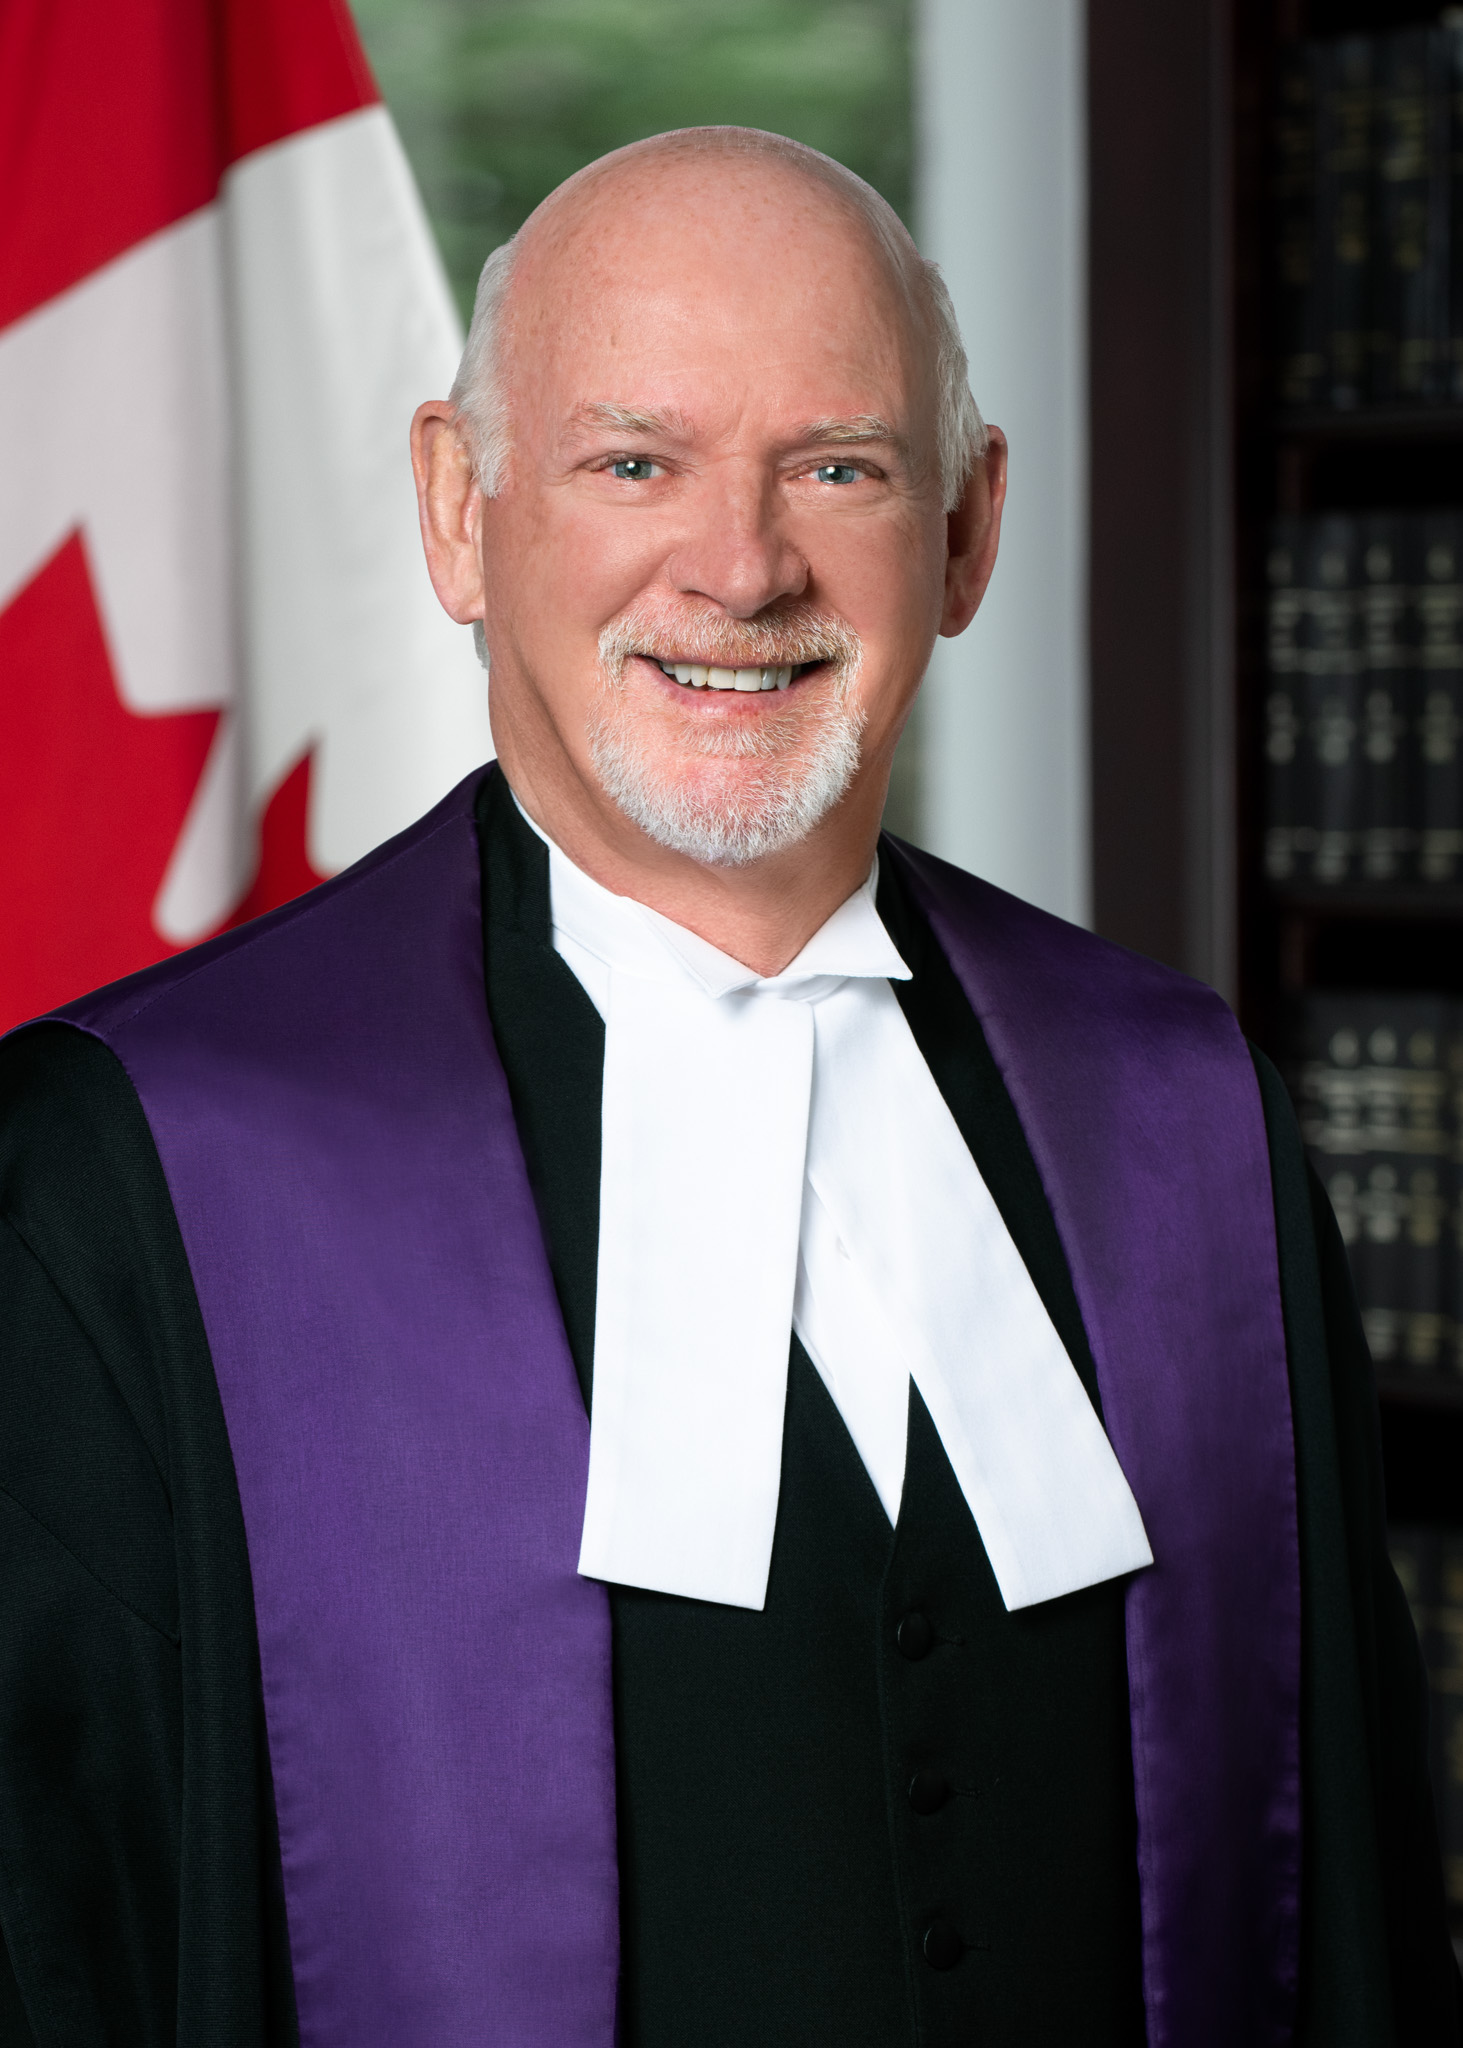 image: L'honorable Eugene P. Rossiter